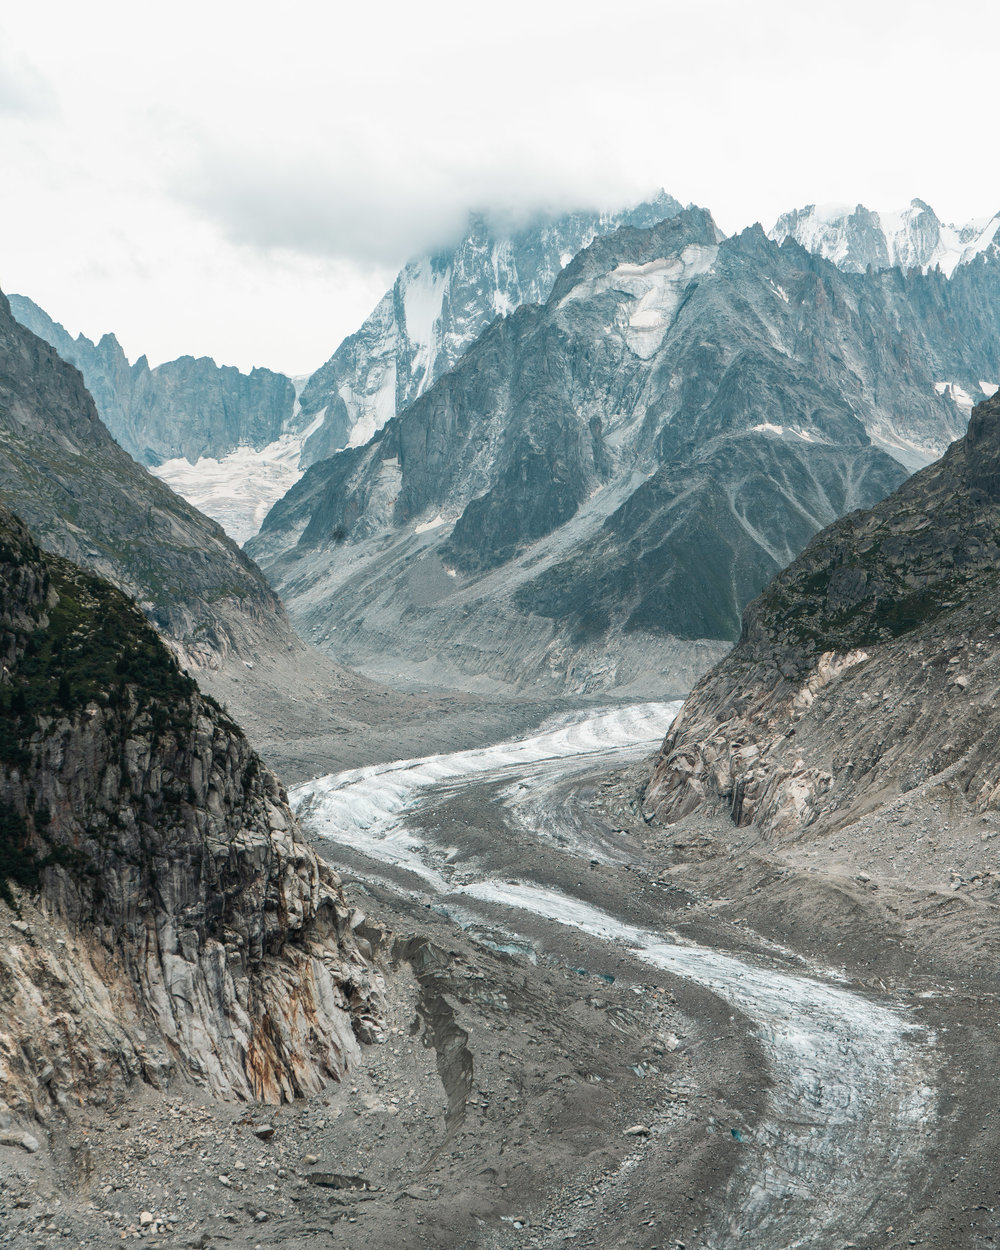 The Mer de Glace is the largest glacier in France, 7km long and 200m deep